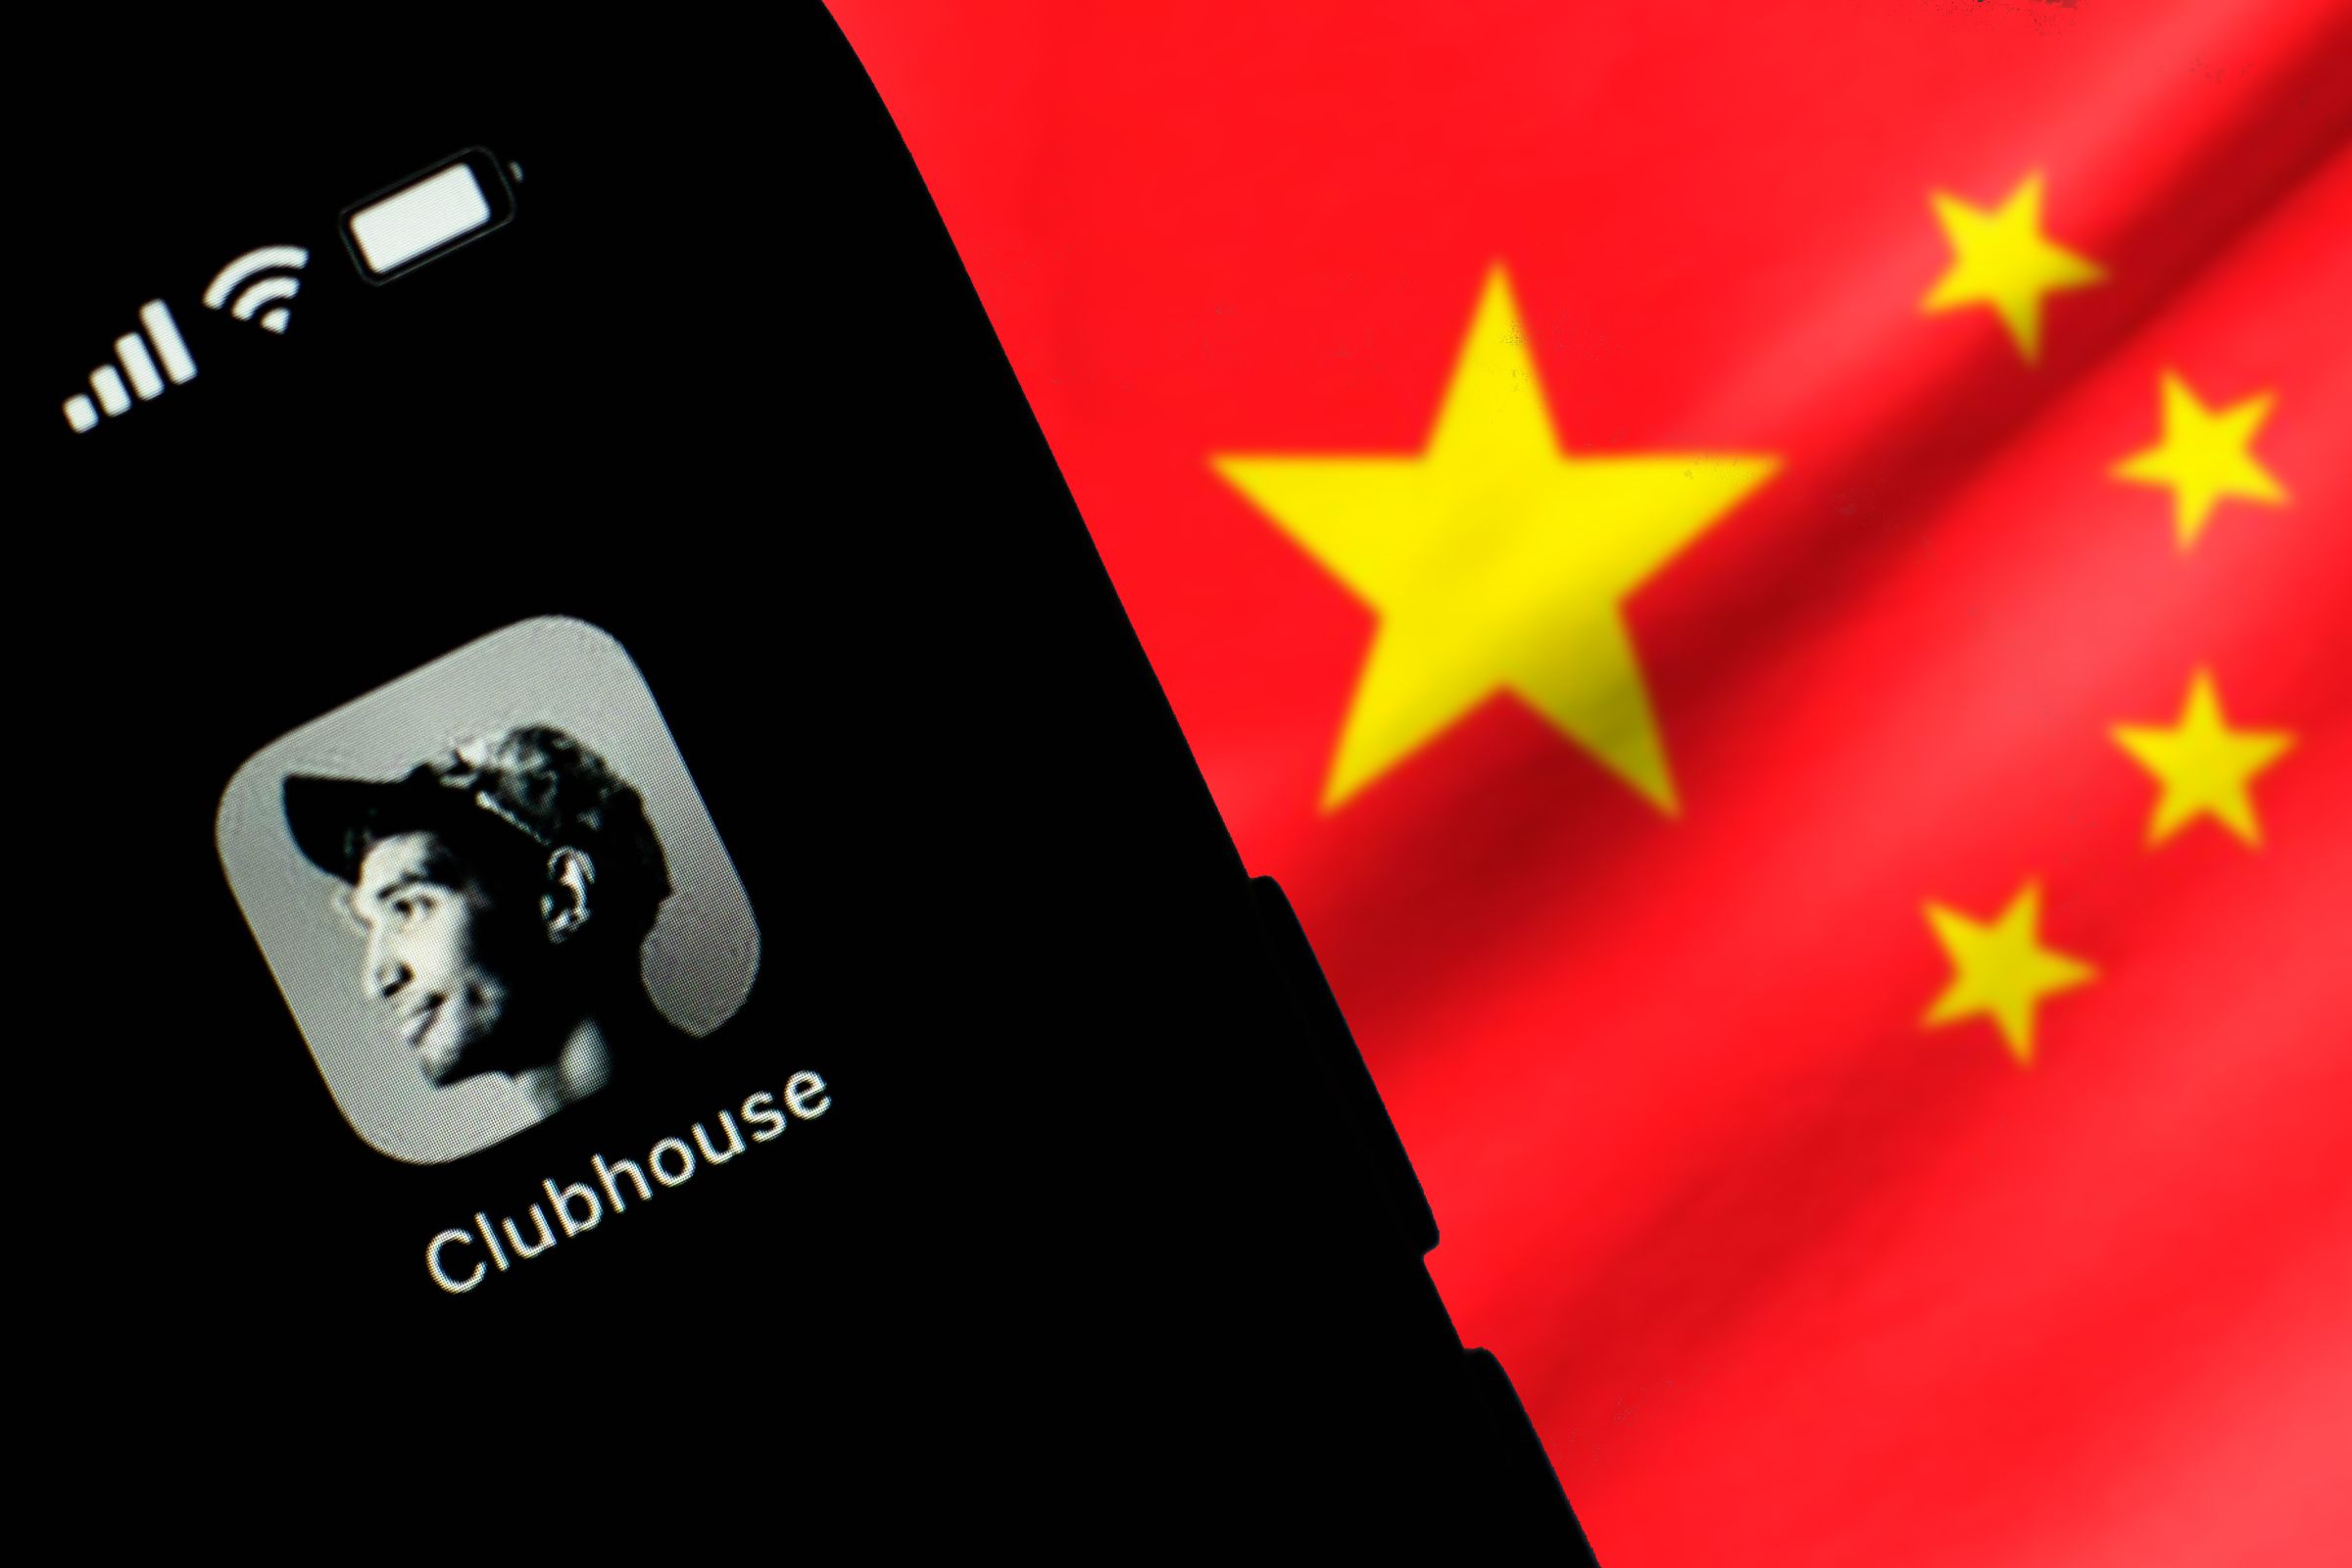 In this photo illustration, the Clubhouse logo seen displayed on a smartphone screen in front of the Chinese national flag